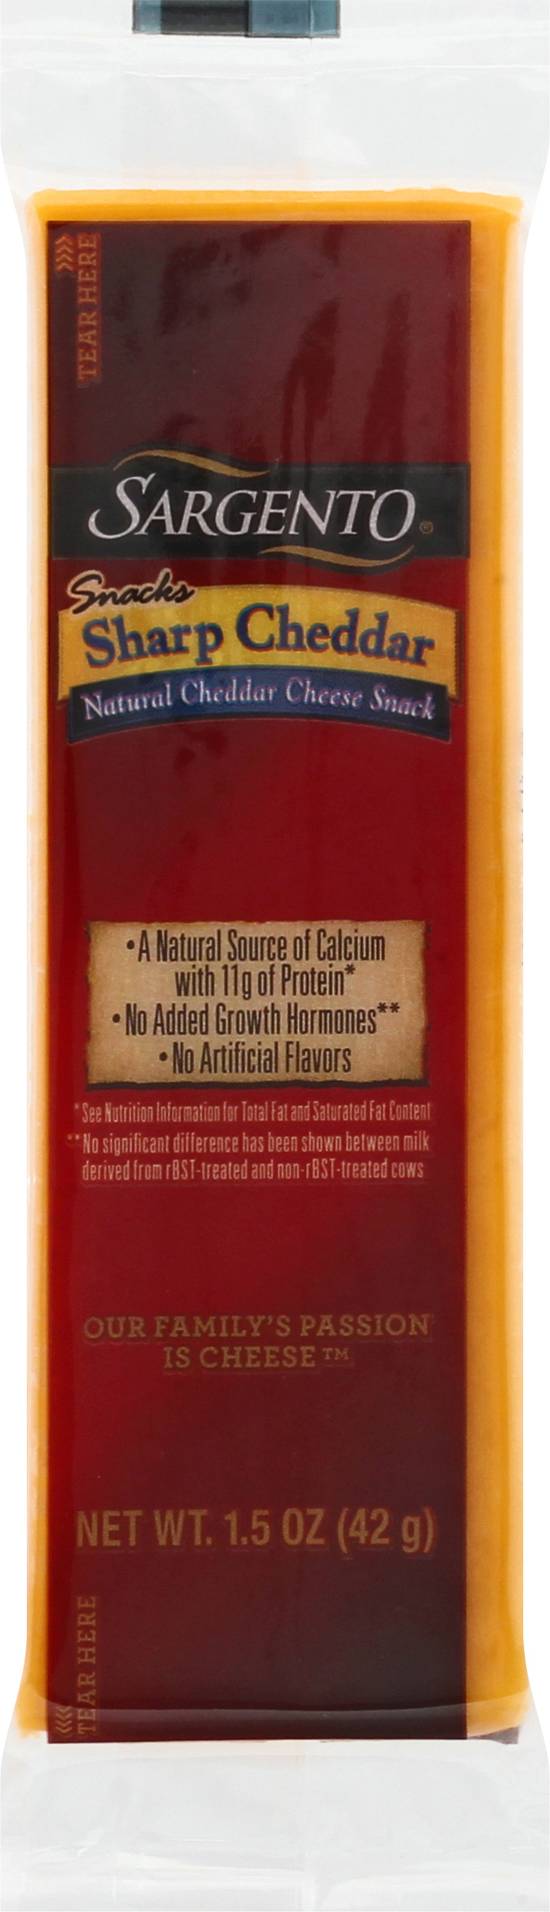 Sargento Sharp Cheddar Natural Cheese Snack